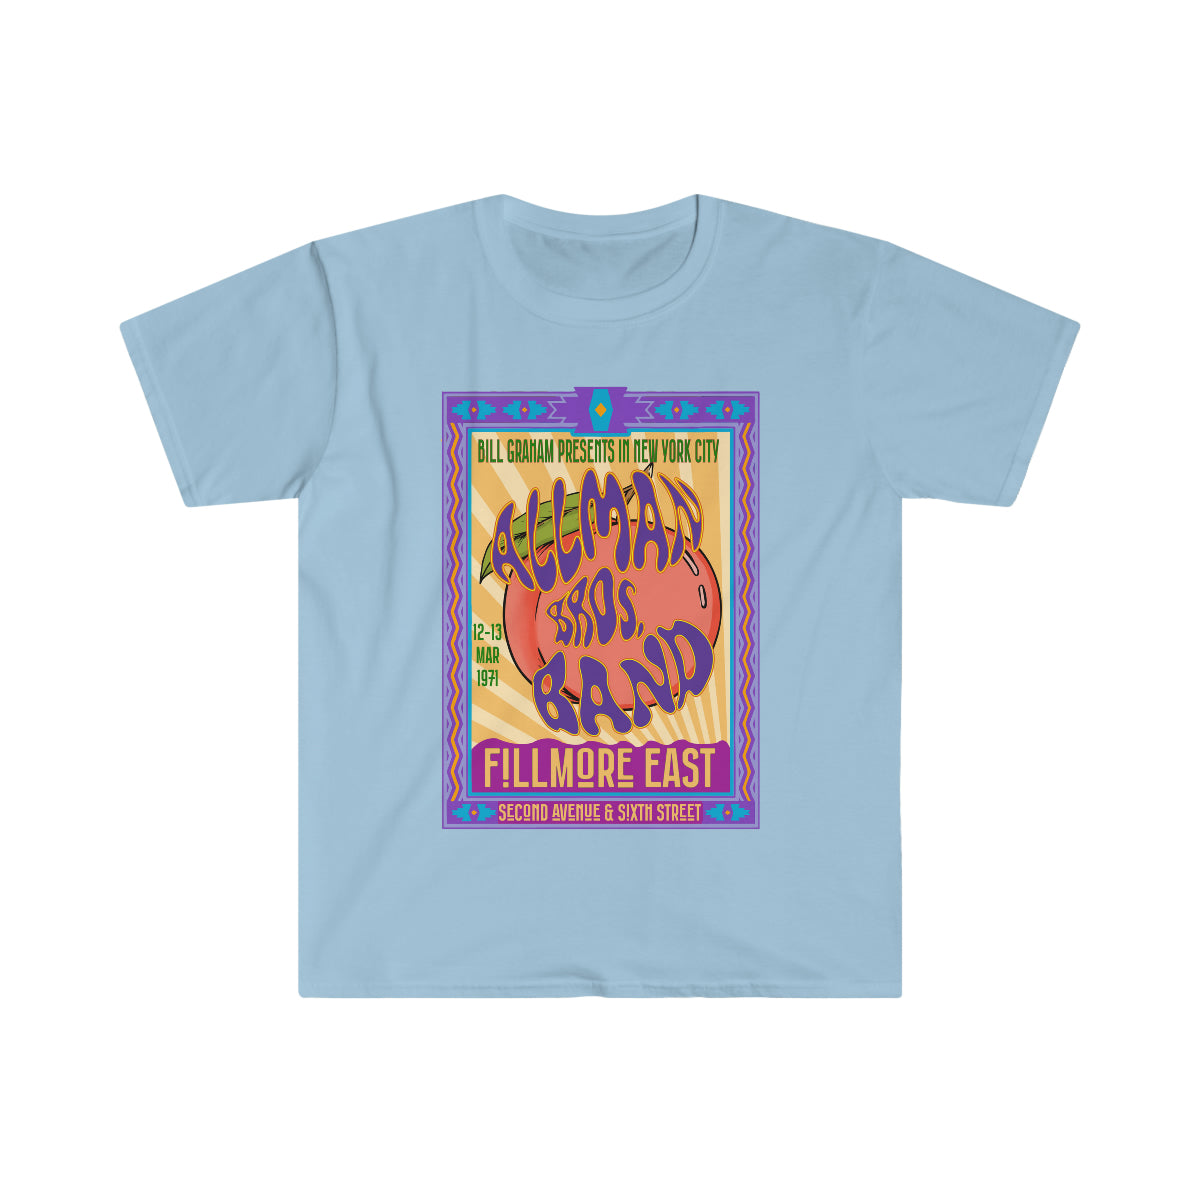 Allman Brothers at the Fillmore East - Unisex T-Shirt